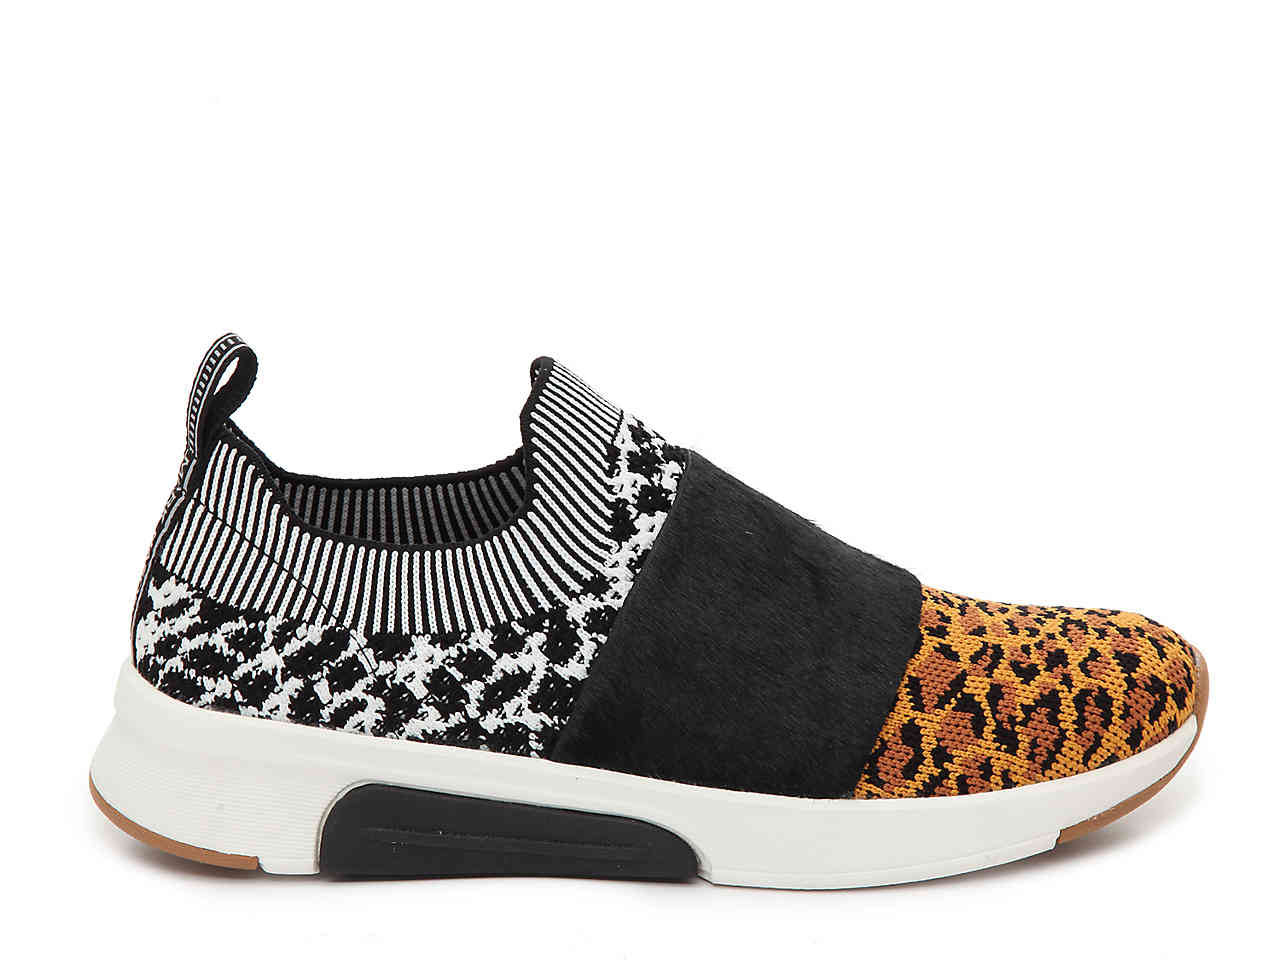 These 20 Leopard Slip-On Sneakers Are 